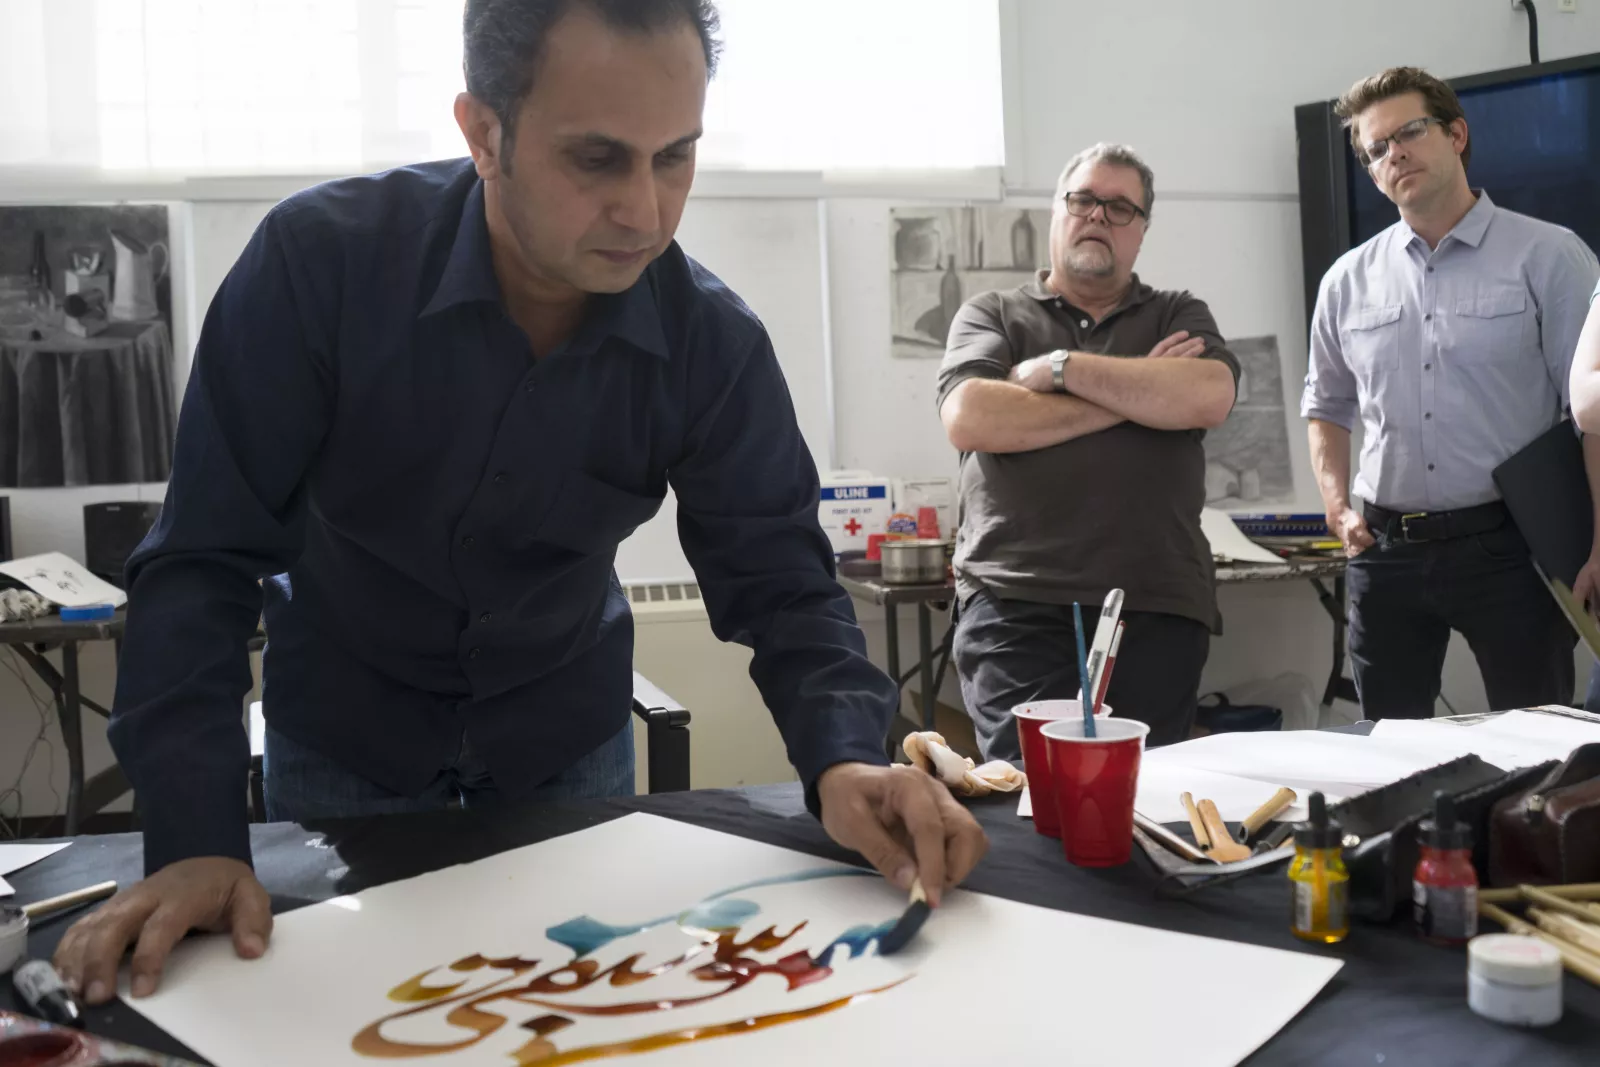 Faculty watch as Khaled al-Saai provides calligraphy demo